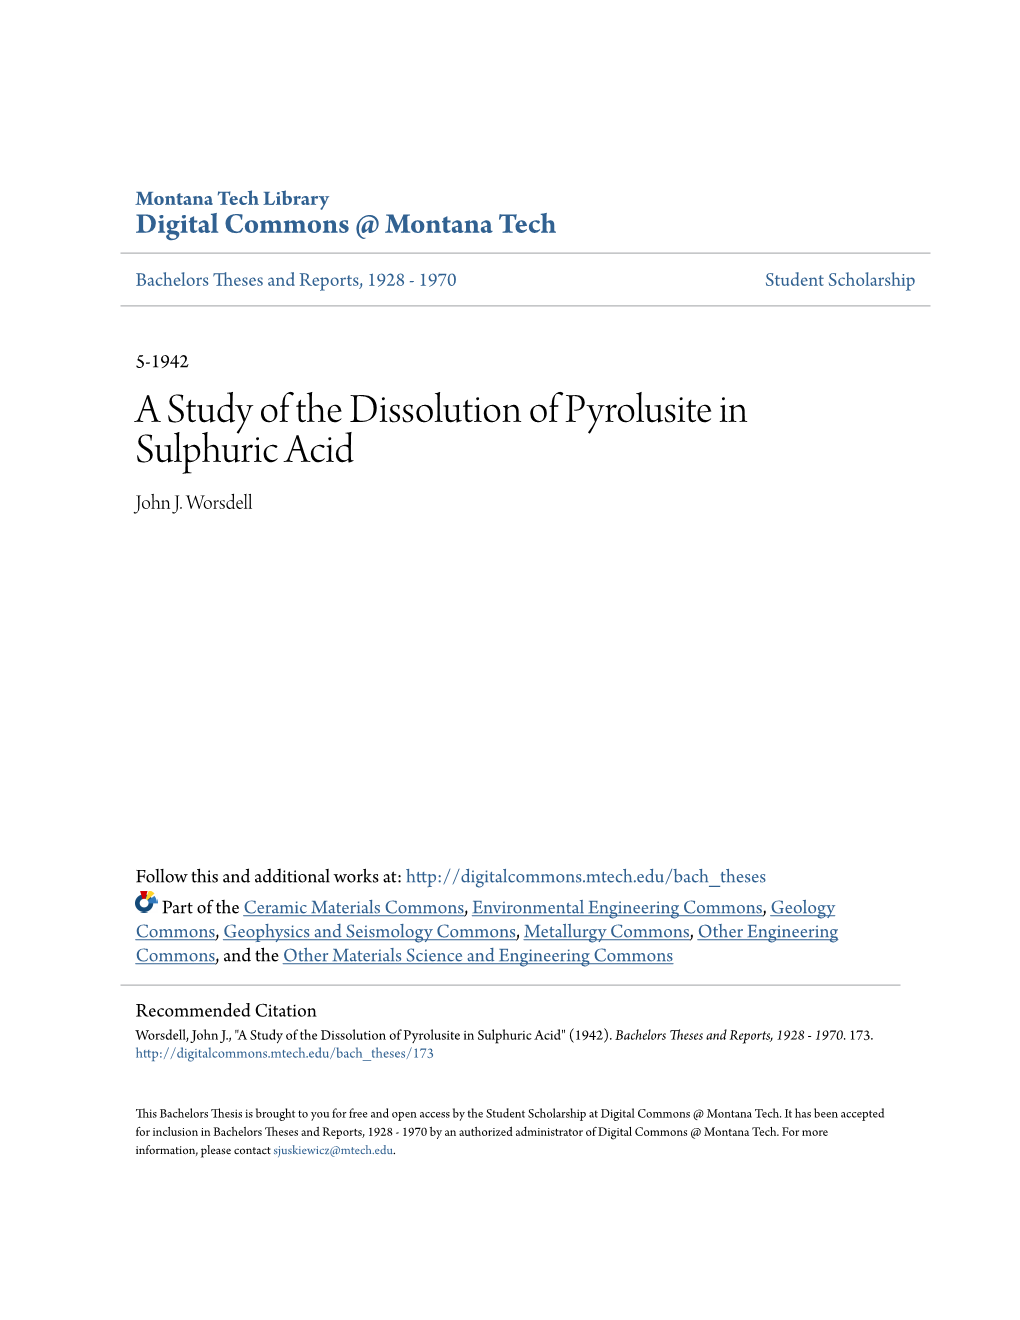 A Study of the Dissolution of Pyrolusite in Sulphuric Acid John J